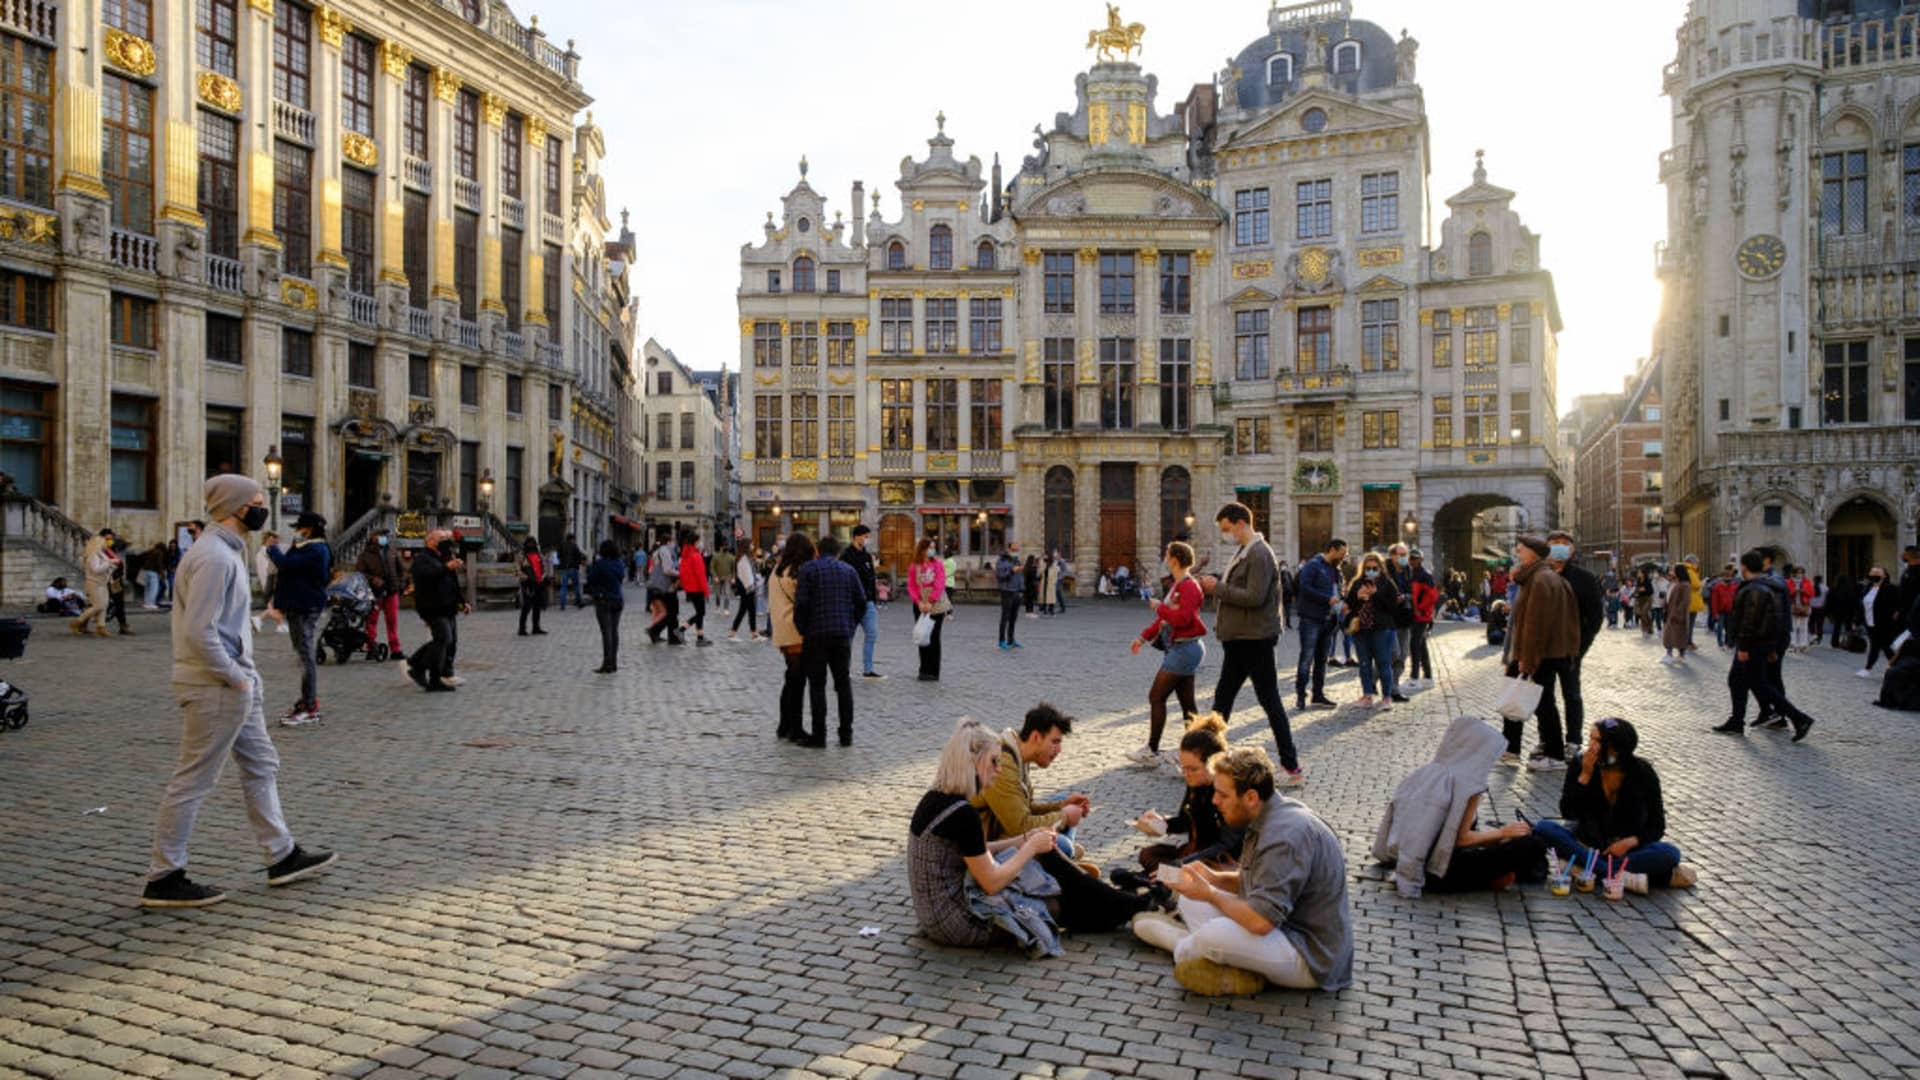 Despite the coronavirus crisis, people enjoy a warm Saturday afternoon on February 20, 2021 in Brussels, Belgium.